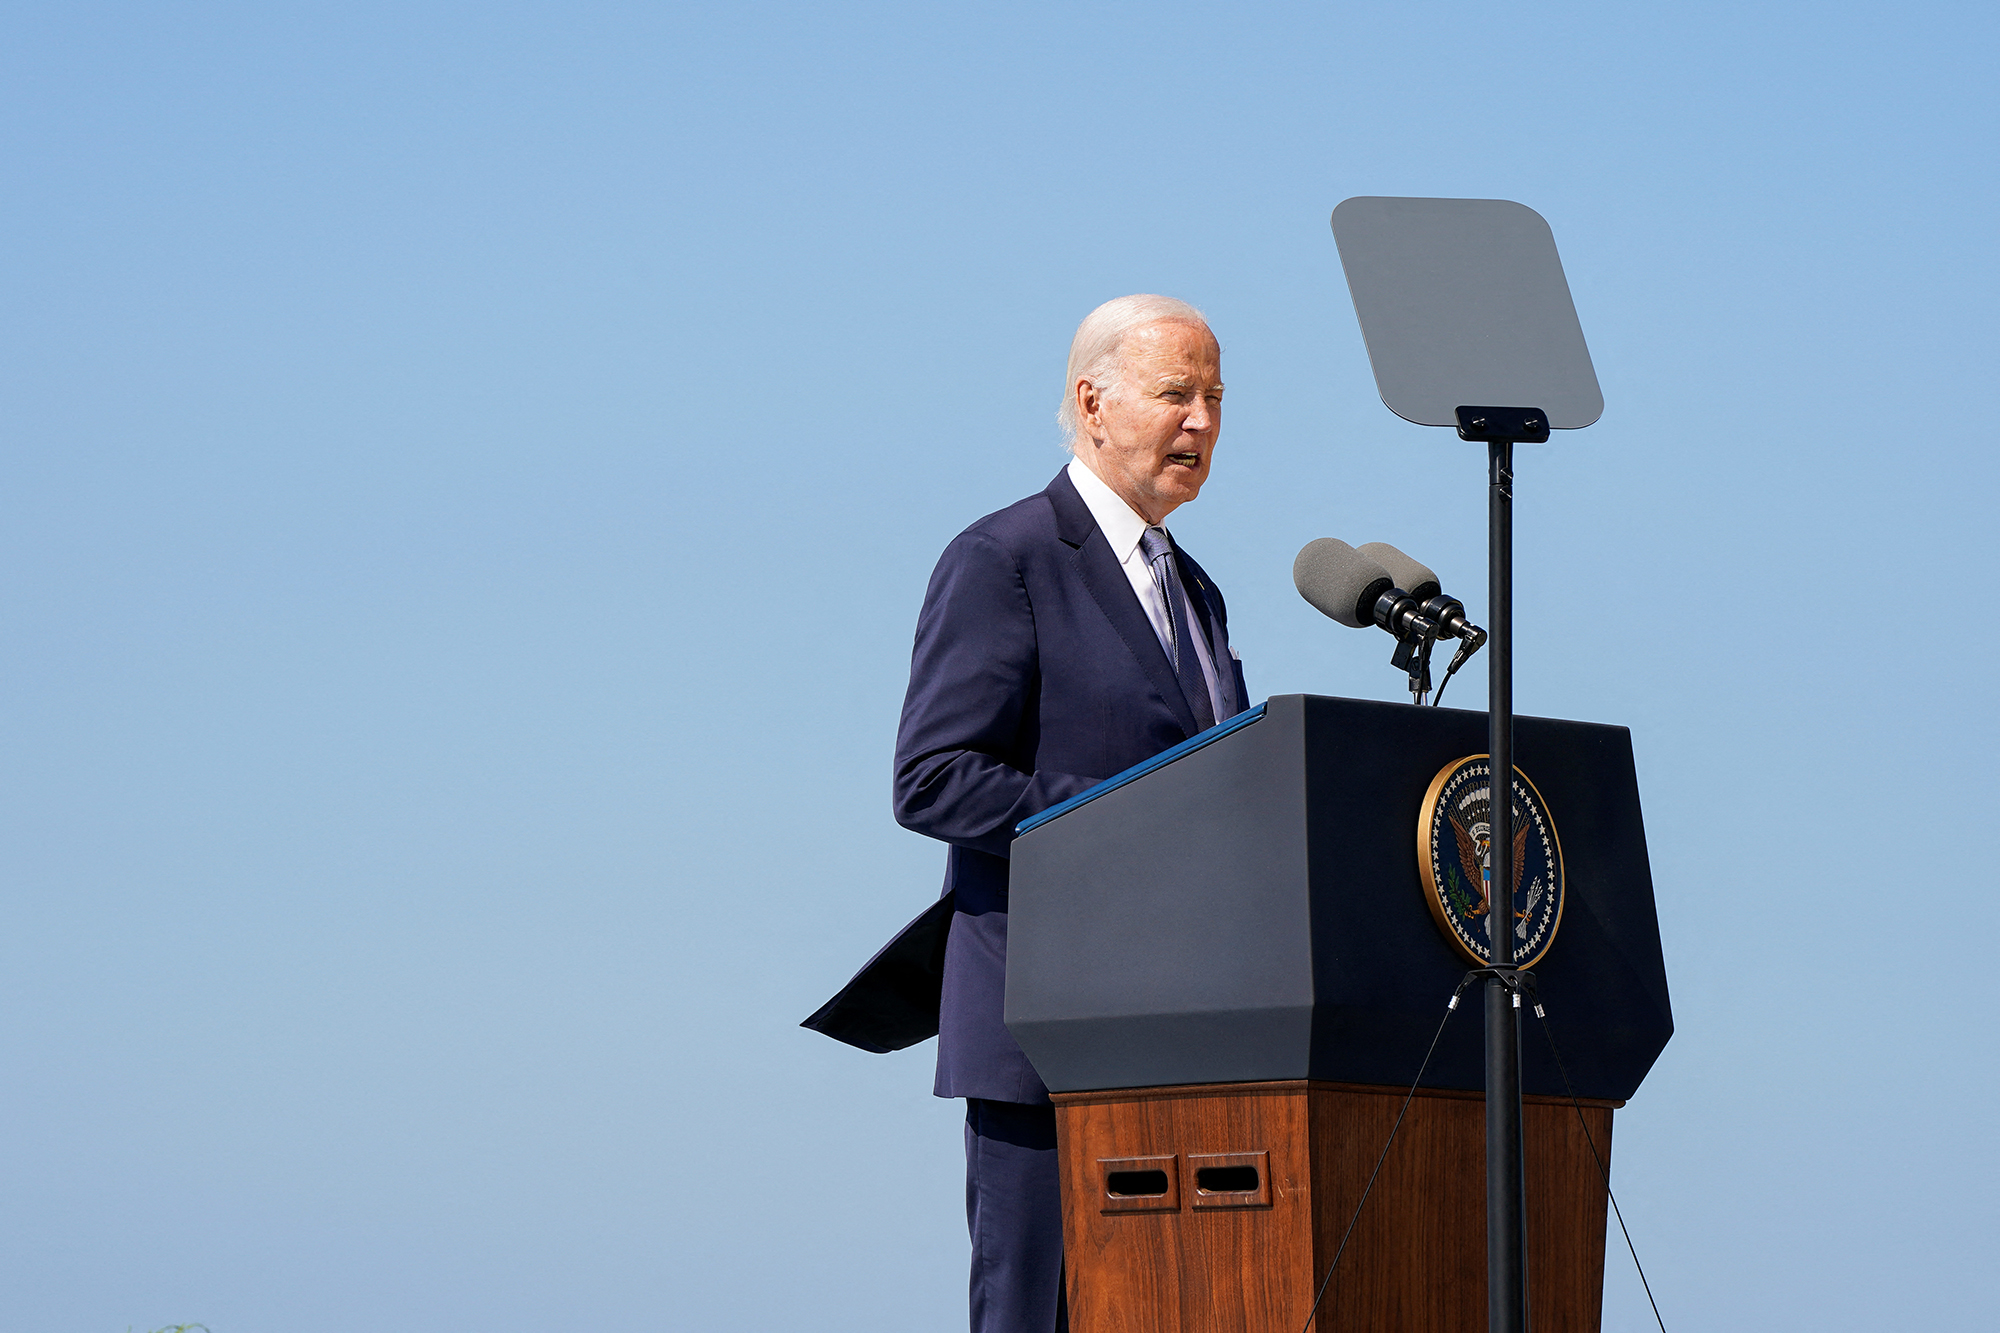 U.S. President Joe Biden delivers remarks at the World War II Pointe du Hoc Ranger Monument following the 80th anniversary of the 1944 D-Day landings in Cricqueville-en-Bessin, Normandy, France, on June 7.